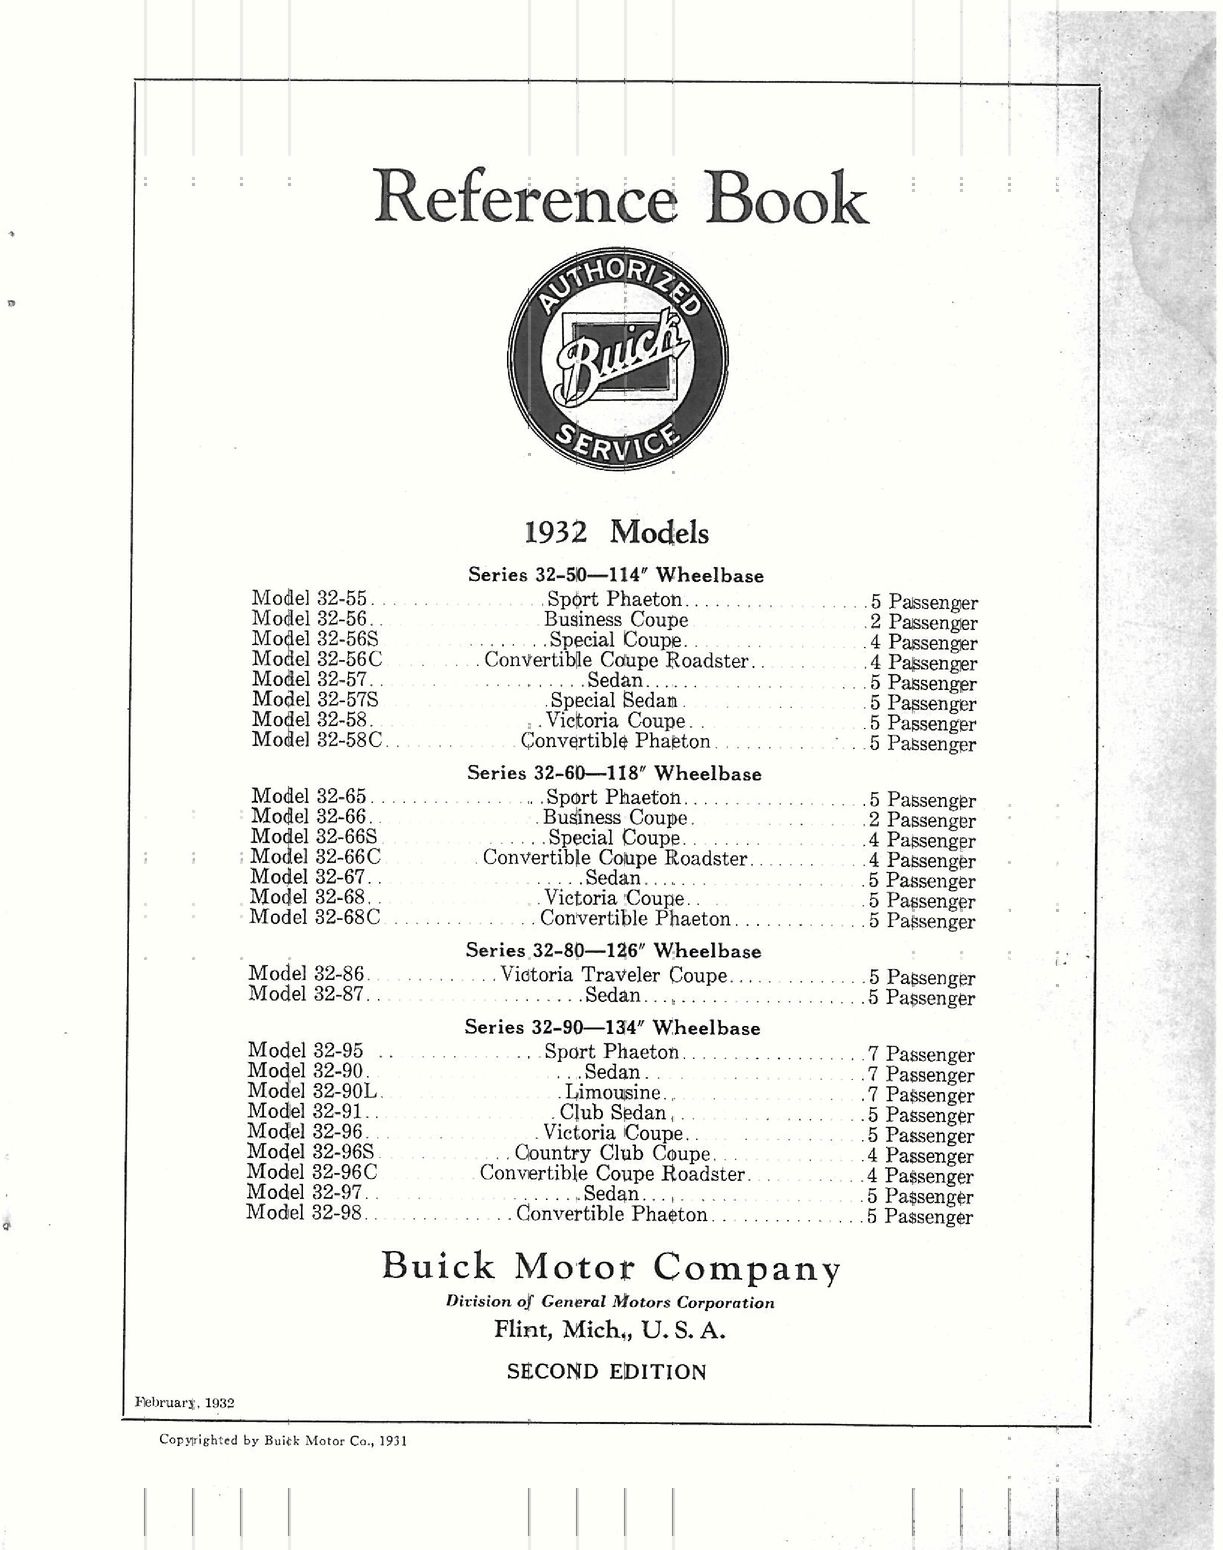 n_1932 Buick Reference Book-01.jpg